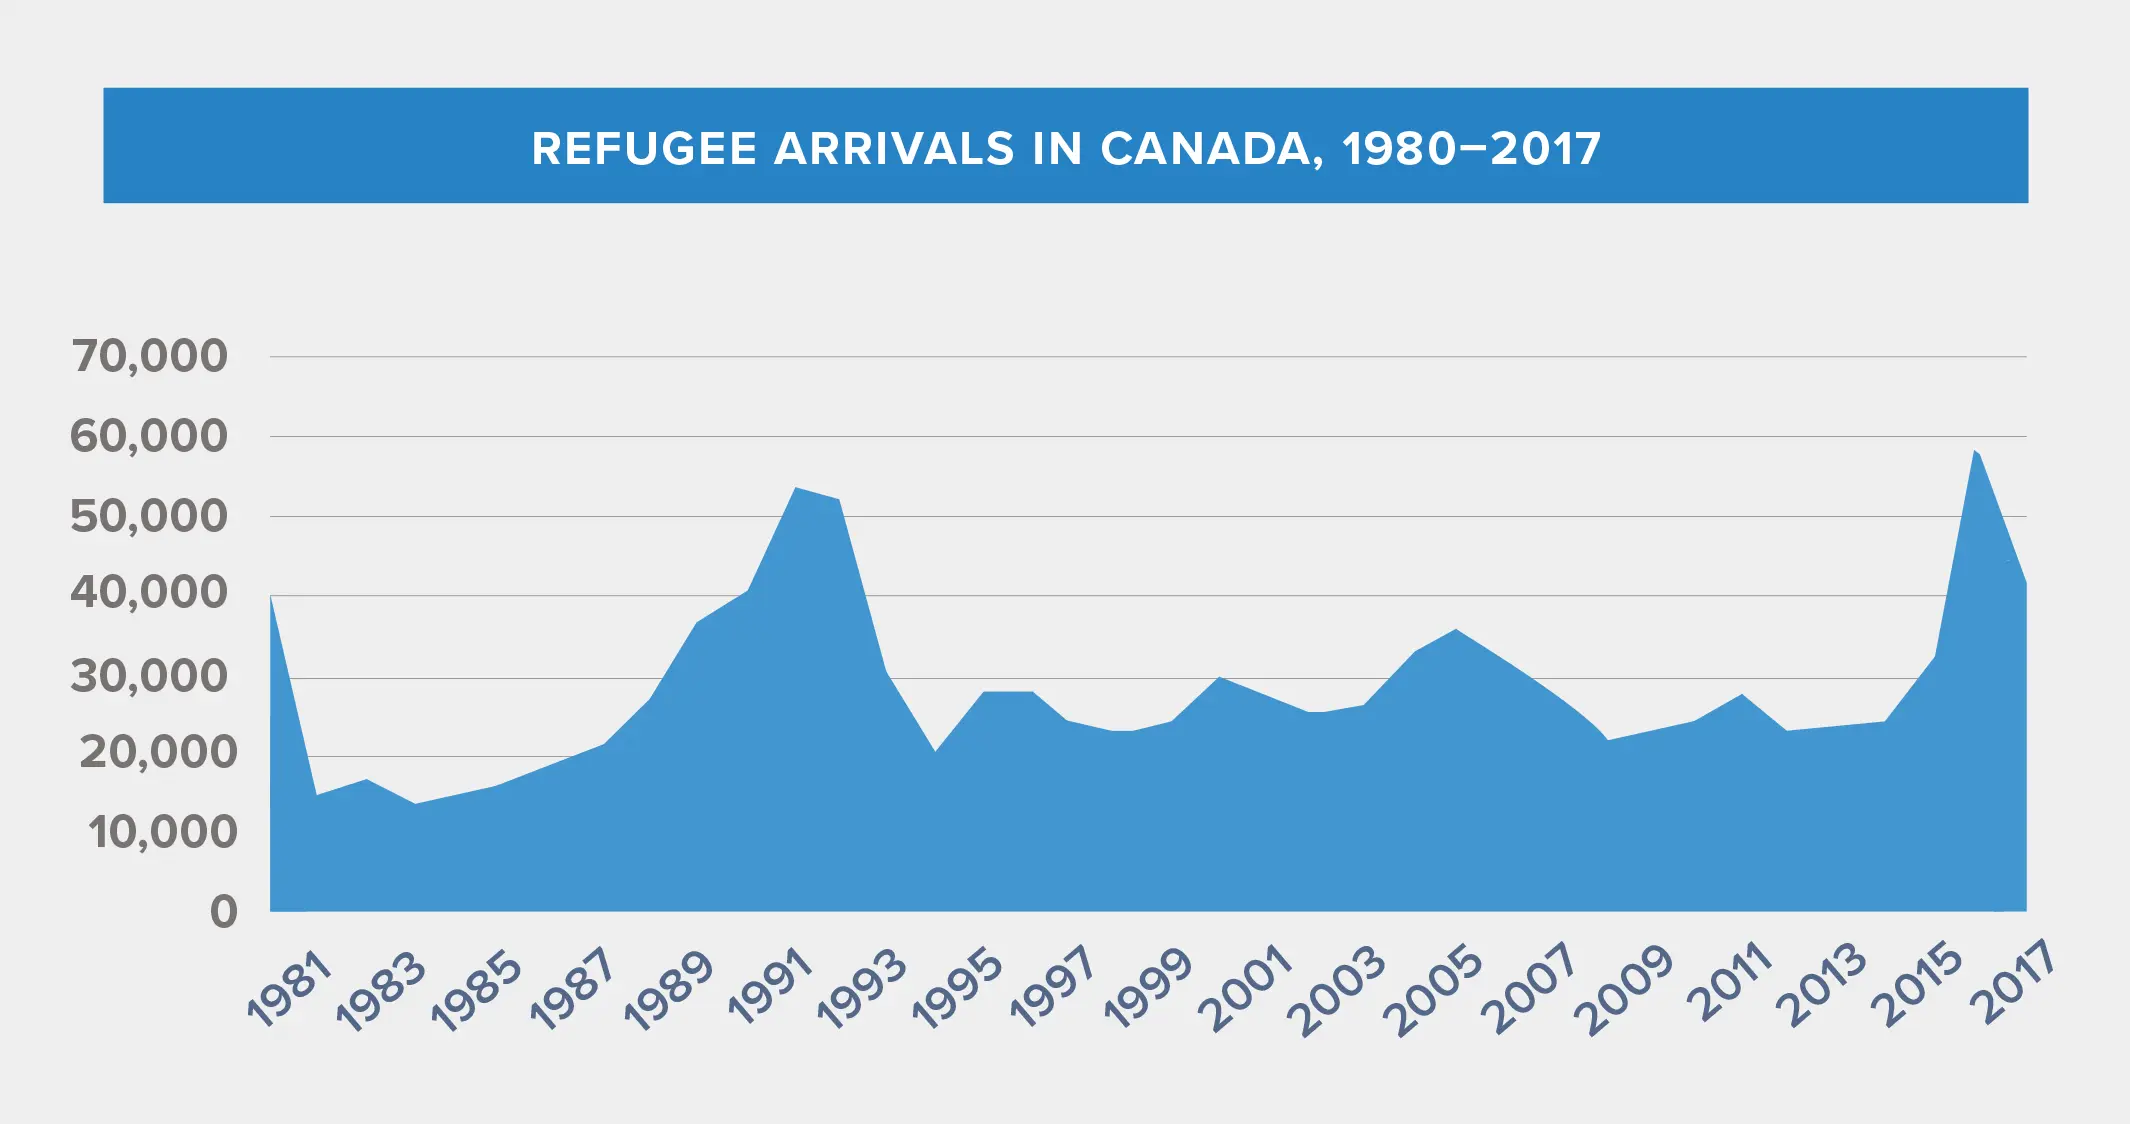 Graph showing refugee arrivals in Canada between 1980 and 2017.